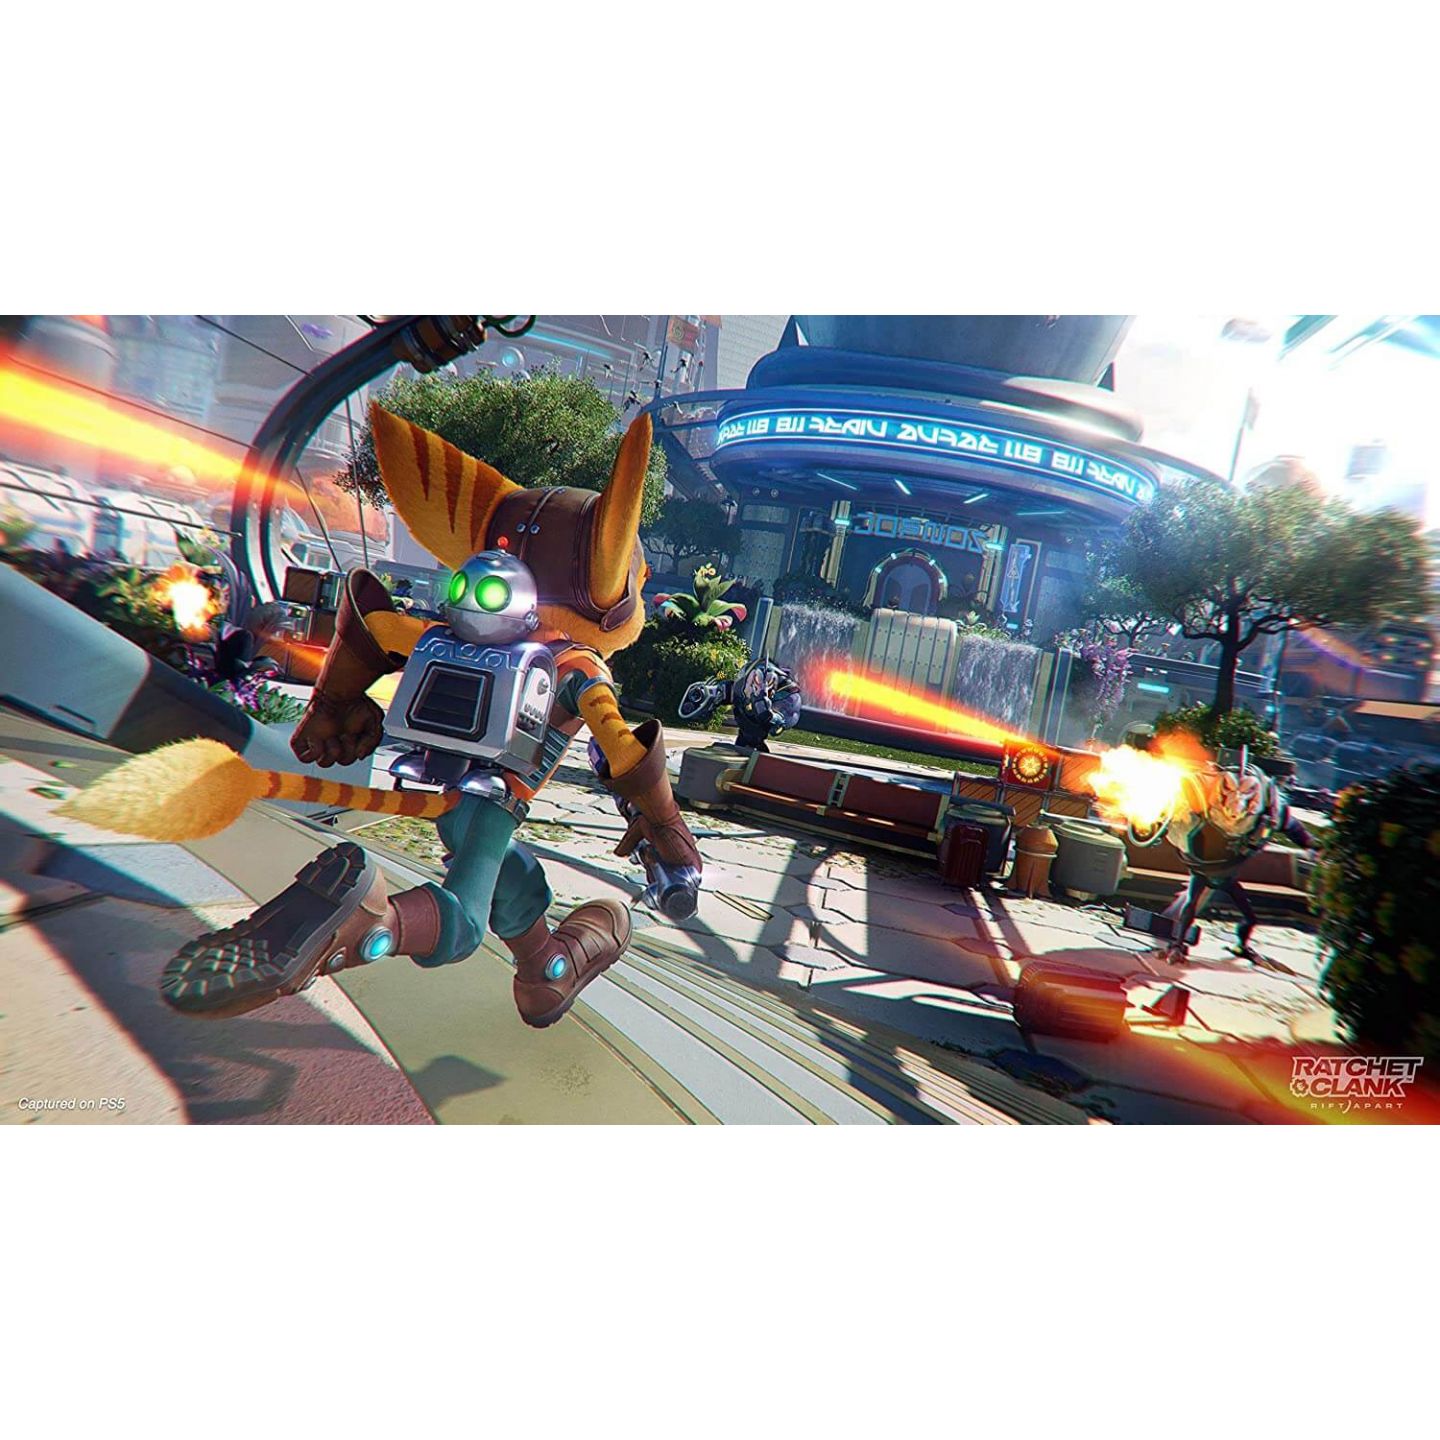 SIE Ratchet & Clank Parallel Trouble PlayStation 5 PS5